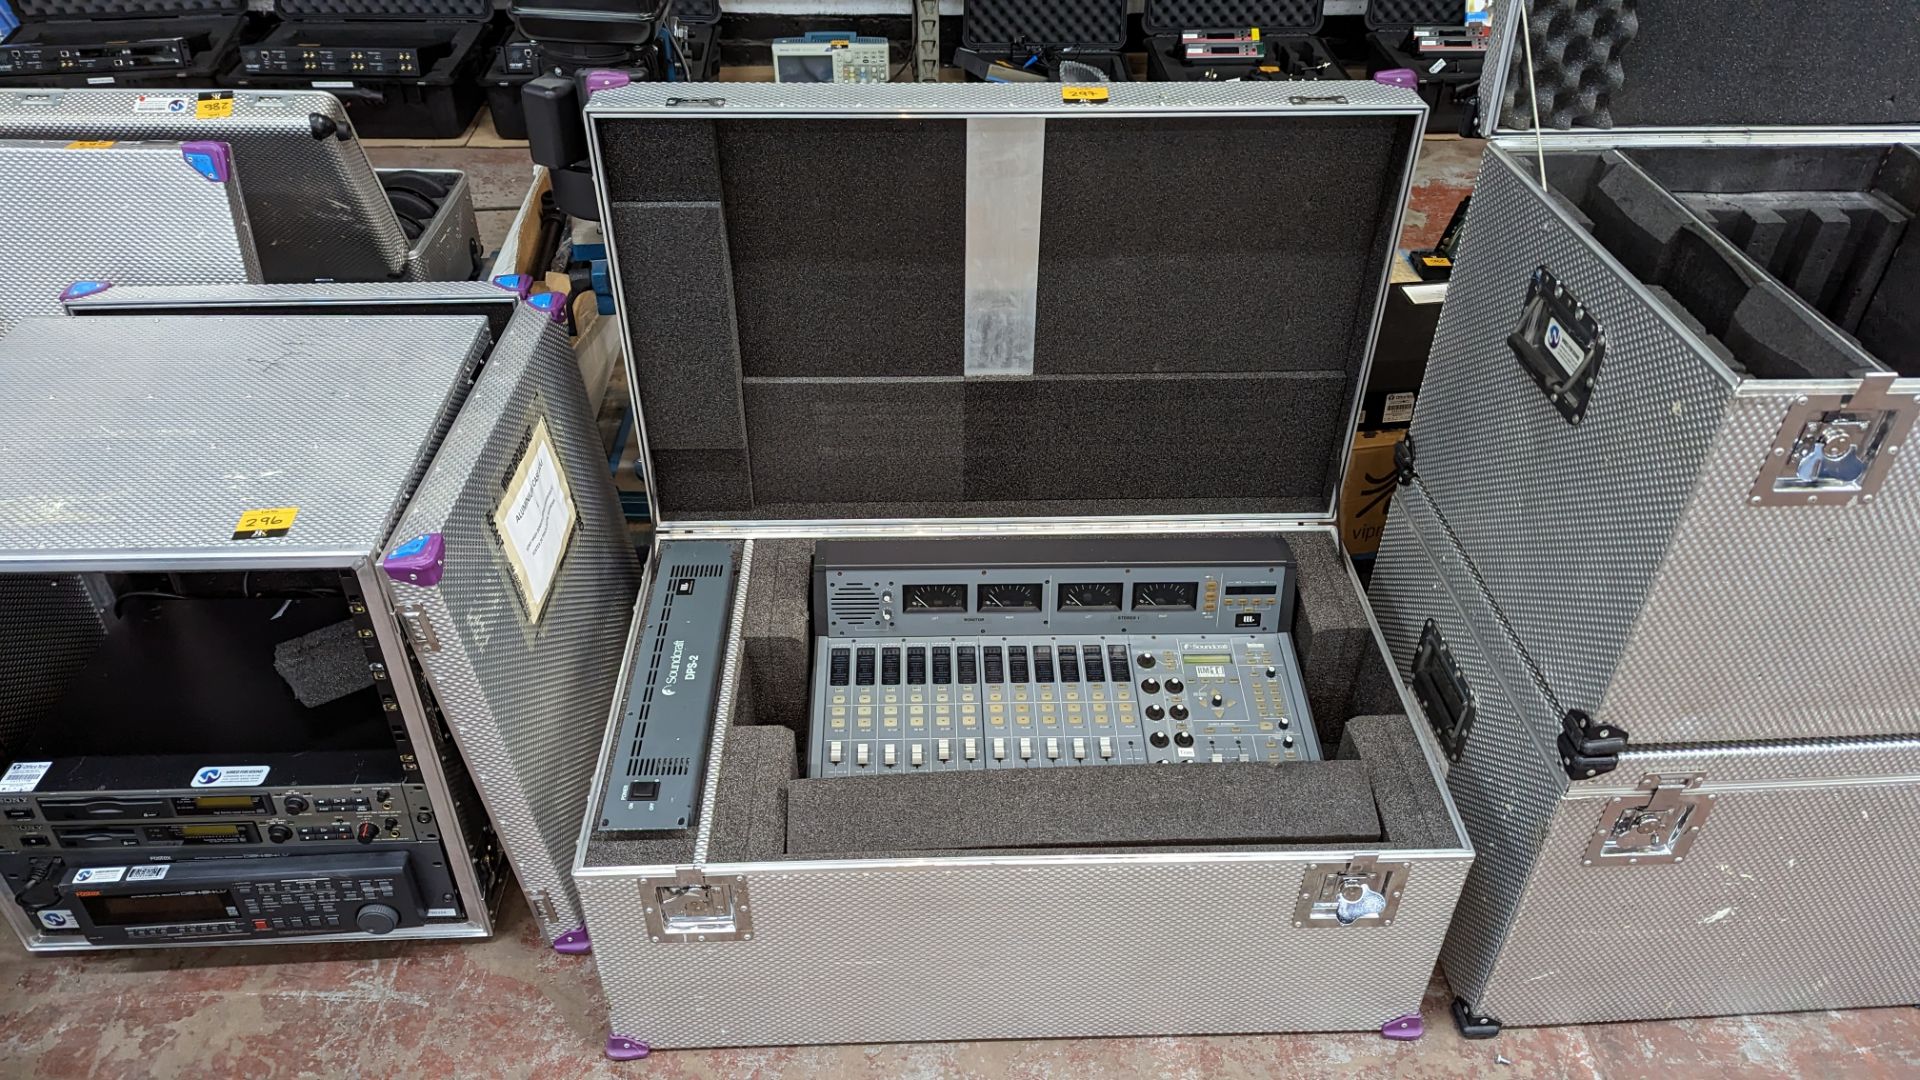 Soundcraft mixing desk, model RM1D, including separate power supply model DPS-2, plus large hinged l